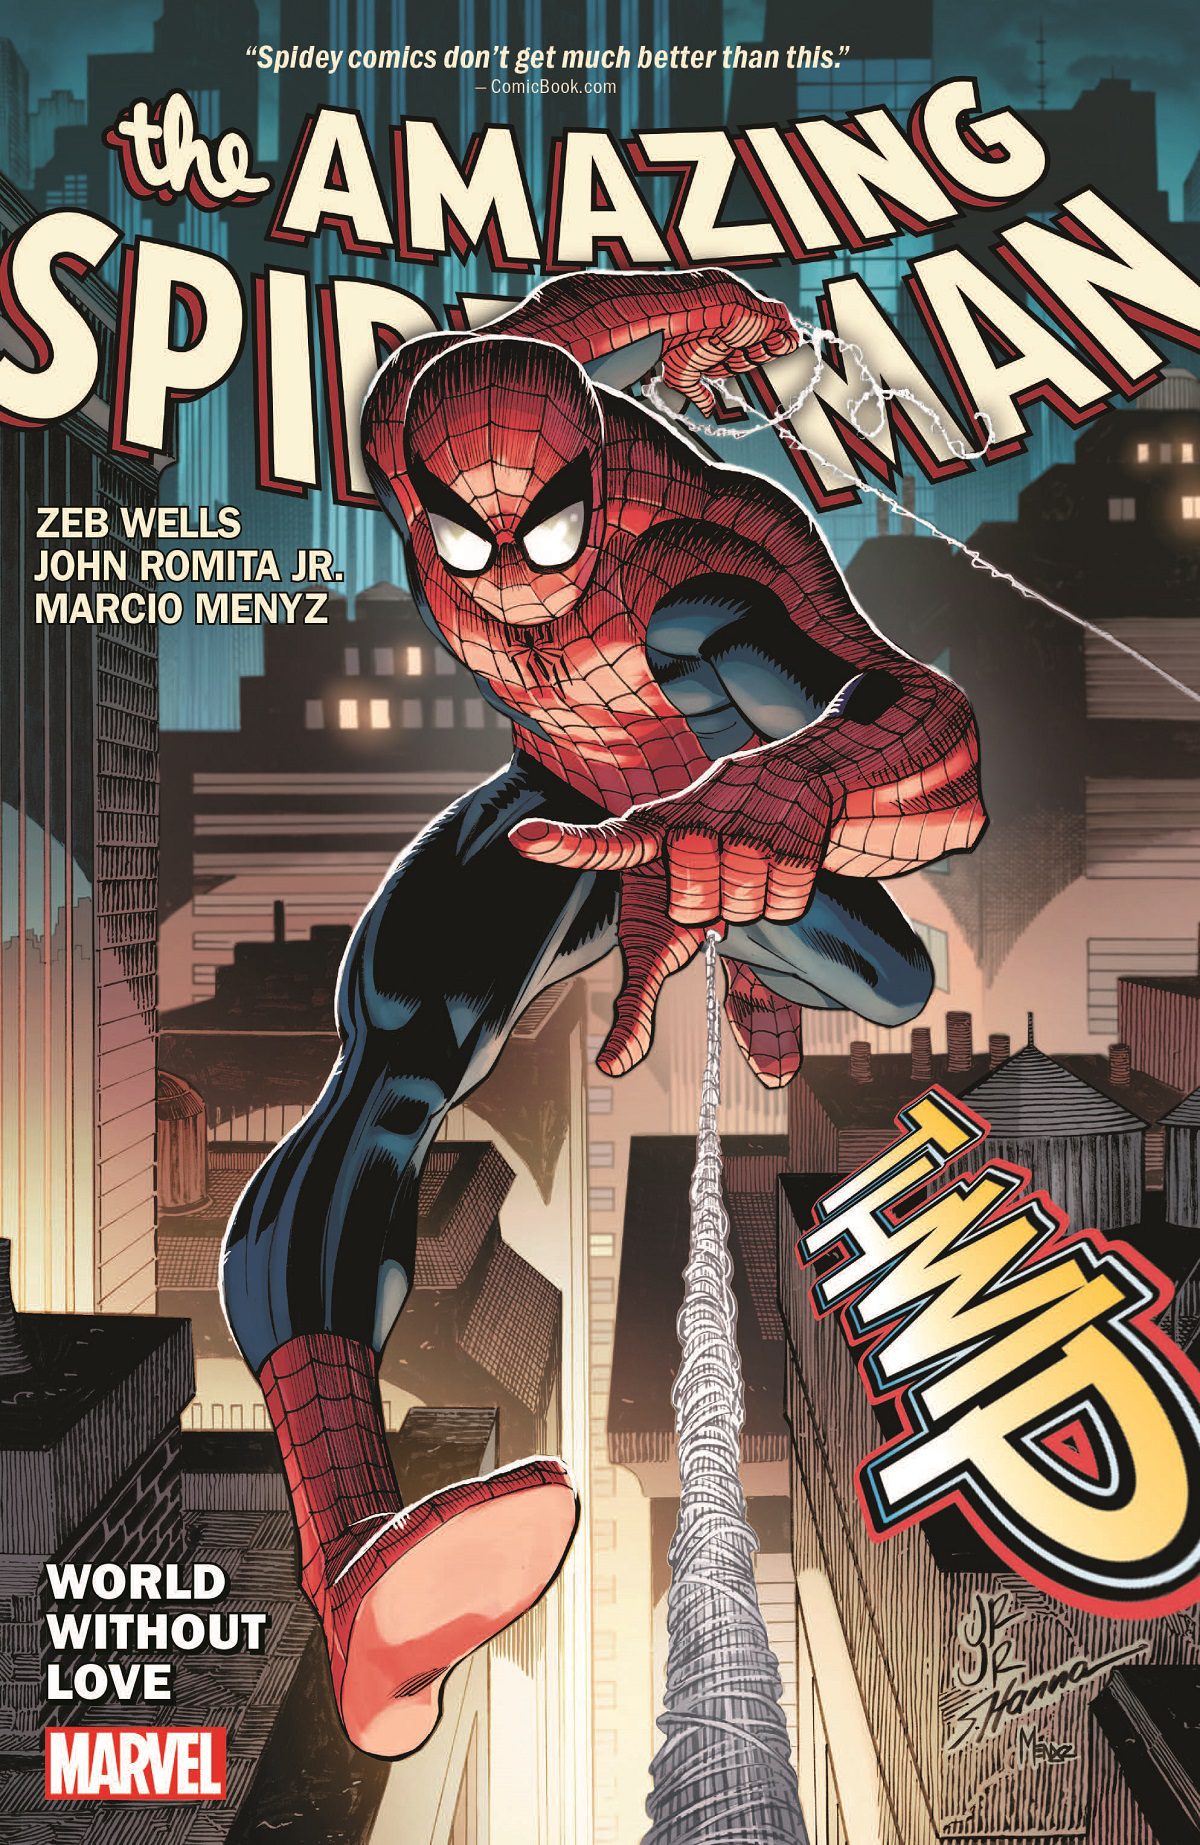 Amazing Spider-Man: World Without Love book cover